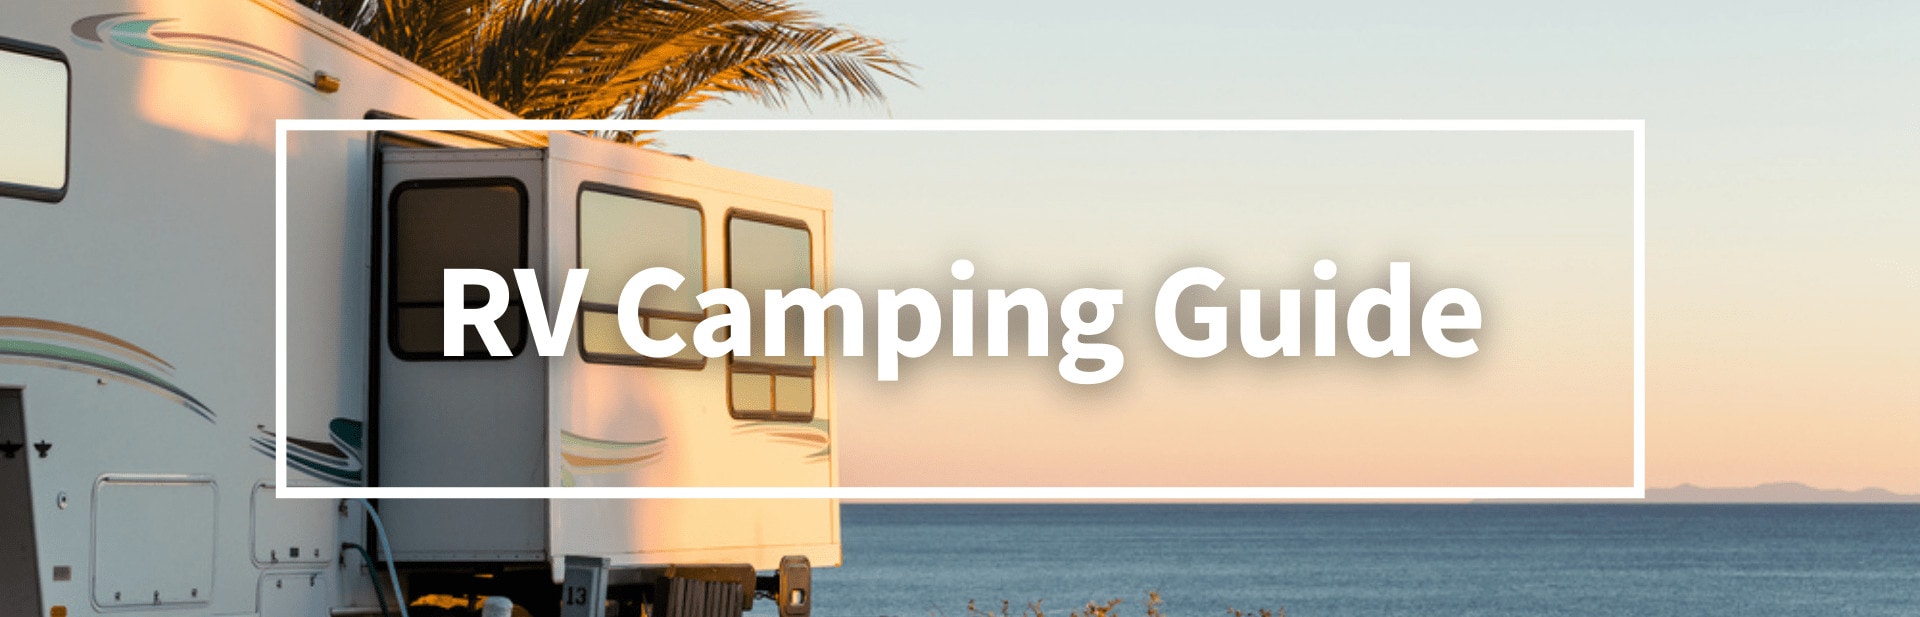 RV Camping Guide: All The Luxuries, All The Nature?